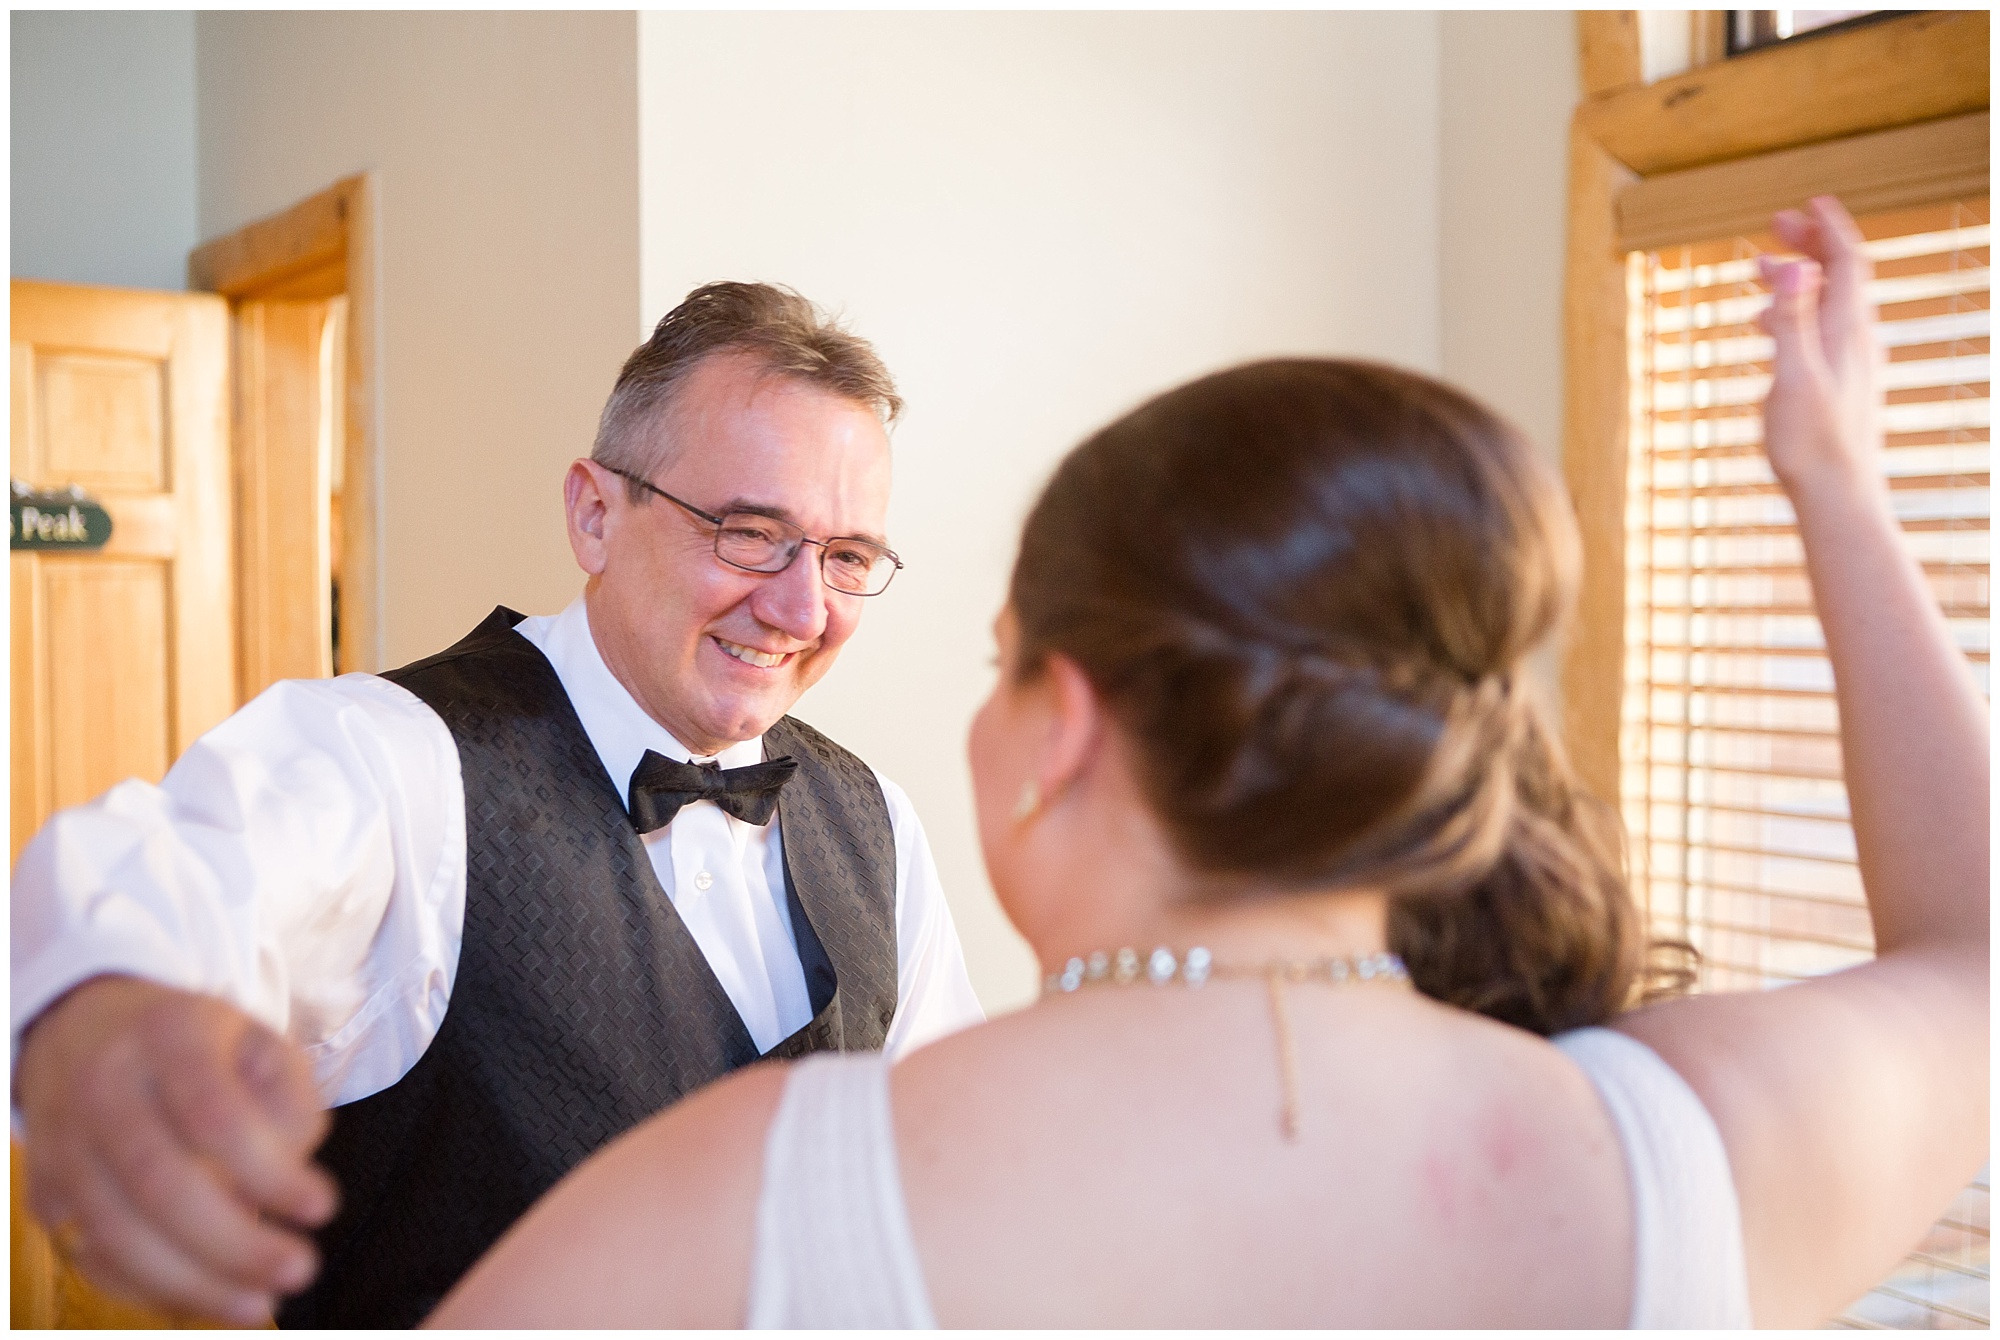 Bride's father sees his daughter for the first time on her Breckenridge wedding day.